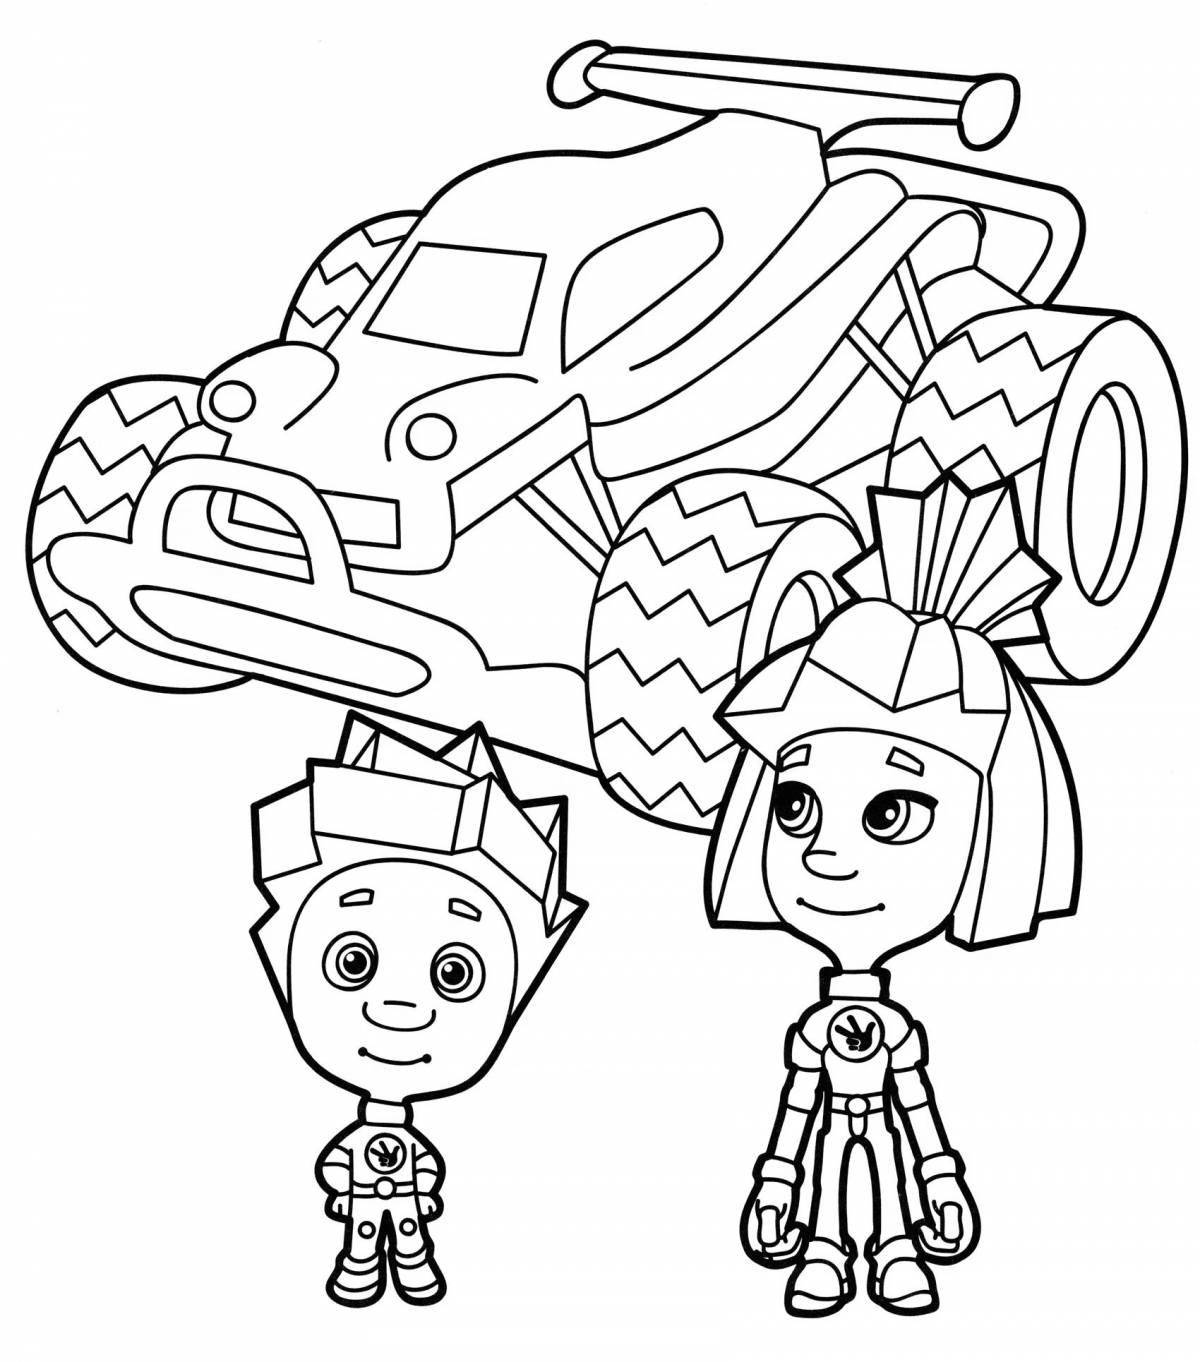 Colorful zero and sim coloring page